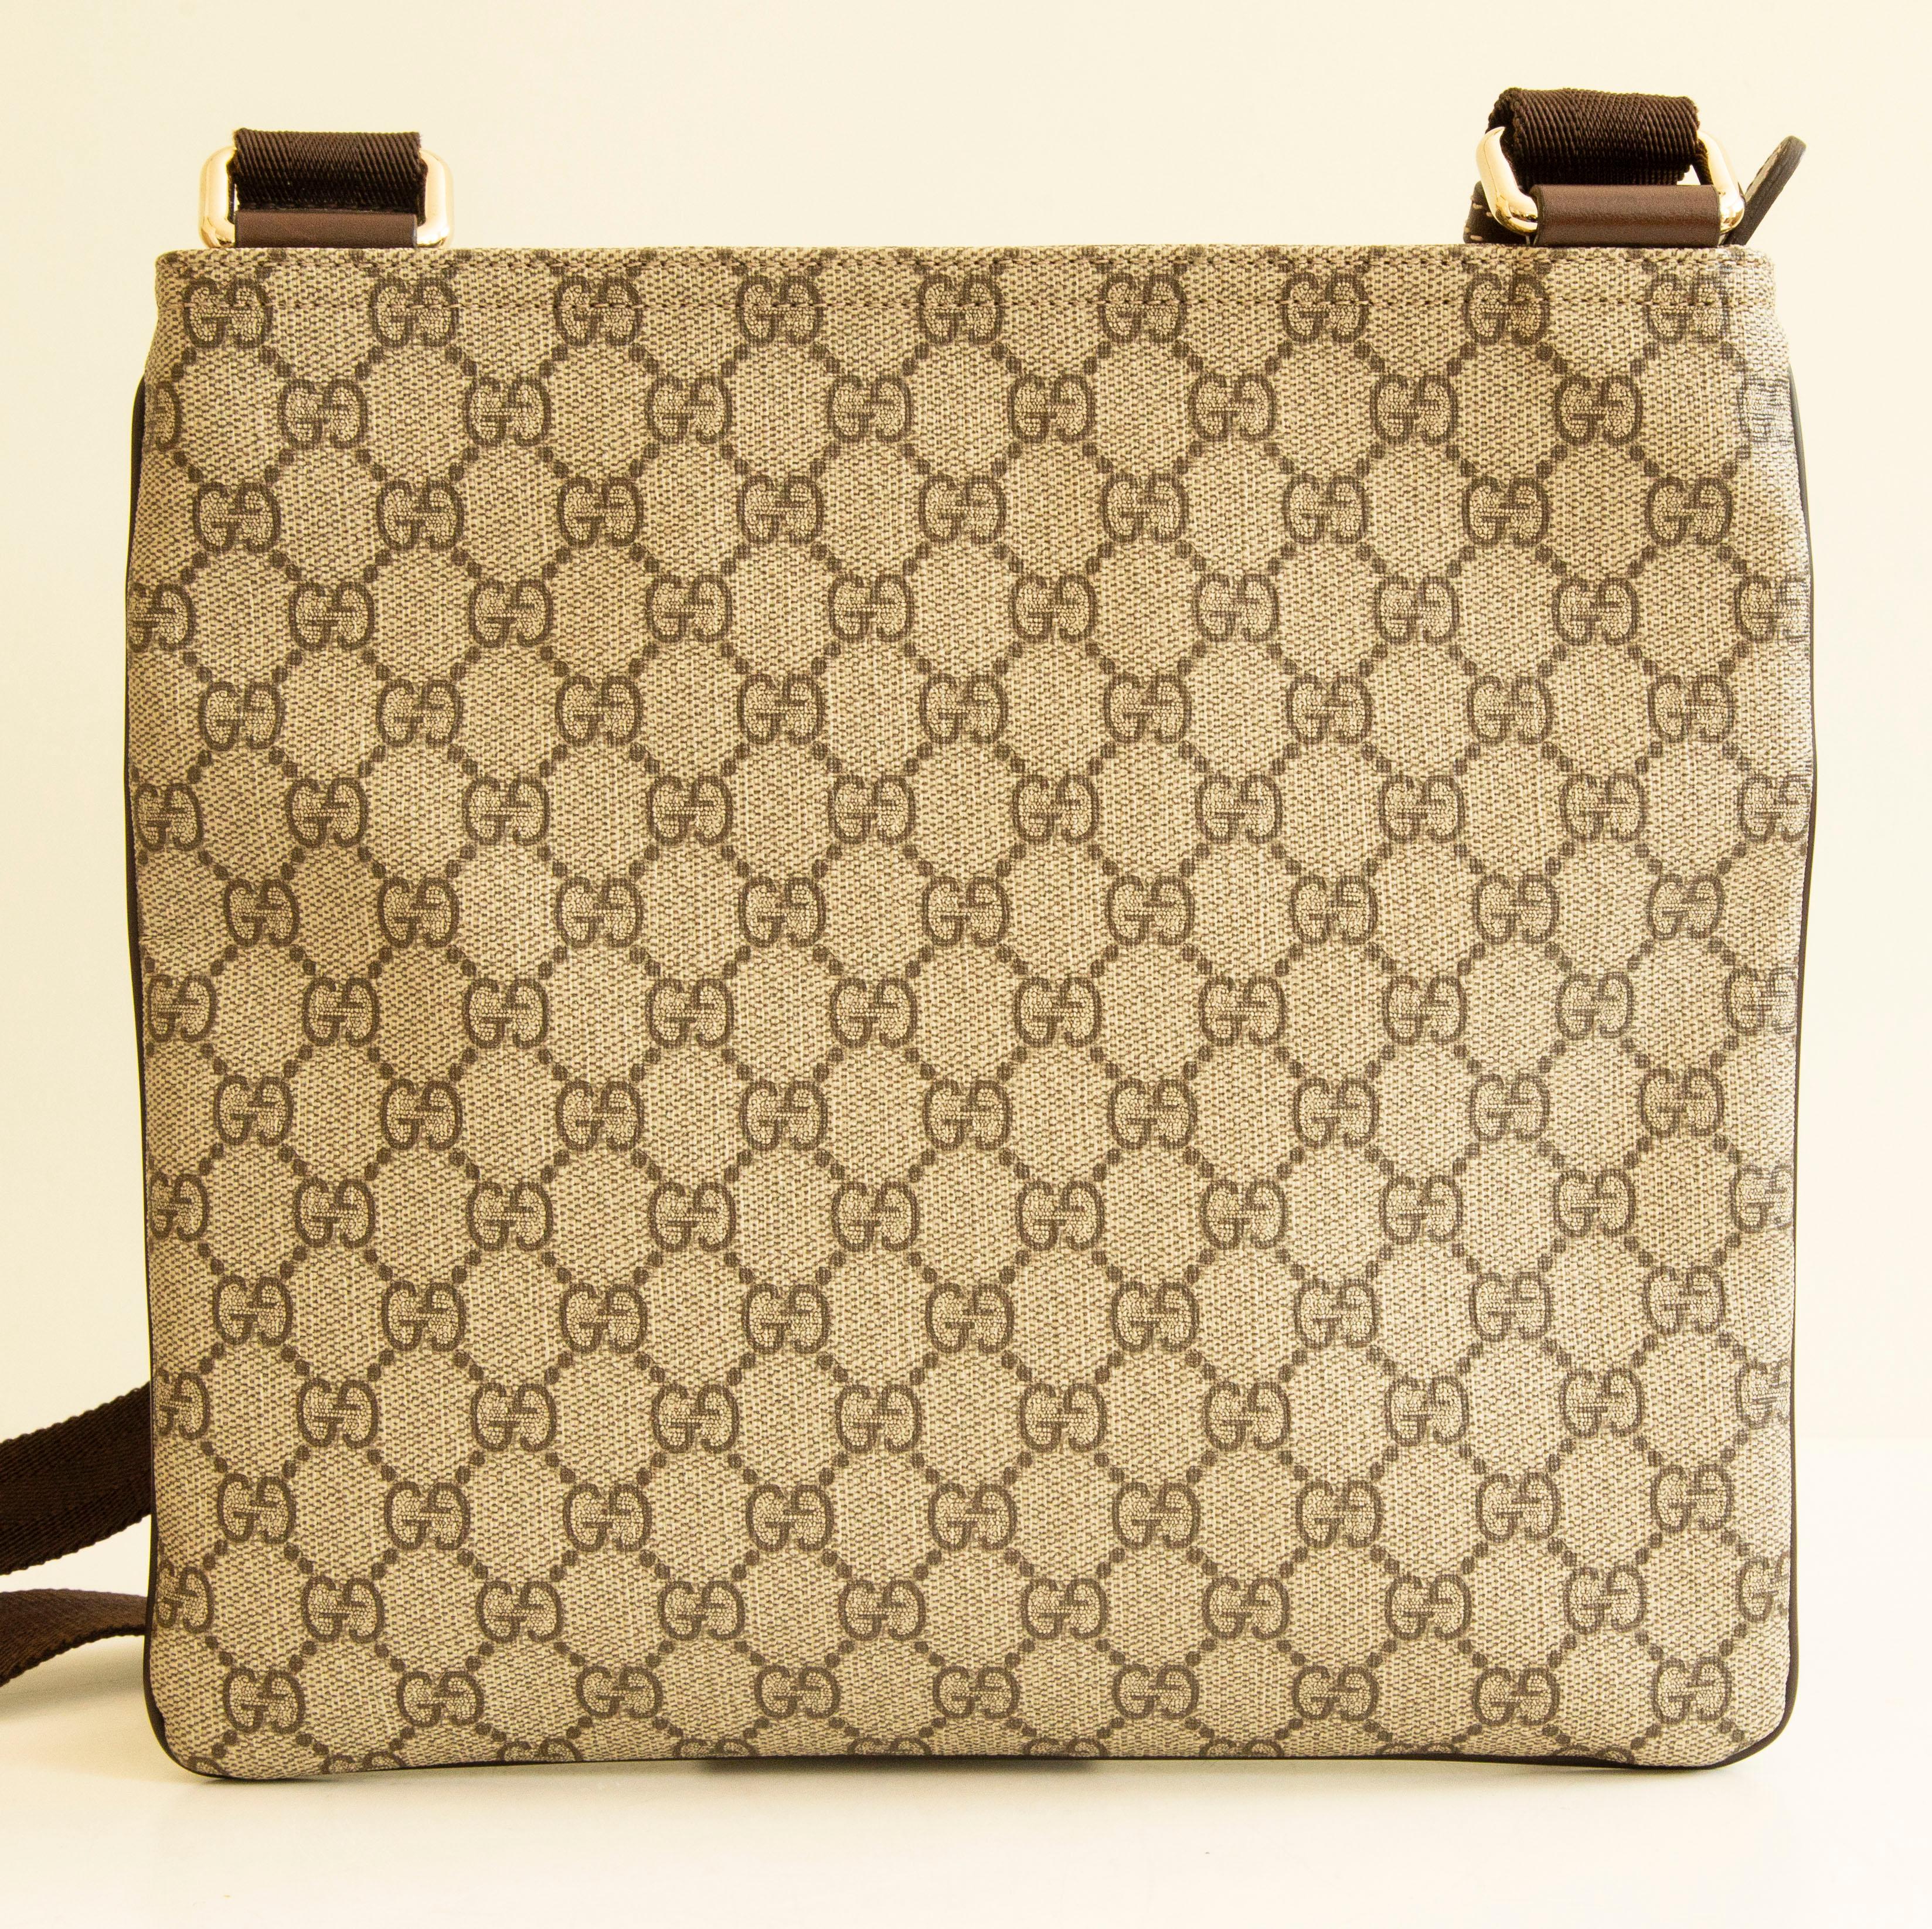 An authentic Gucci messenger bag. The bag features a gg supreme exterior, brown leather trim, and silver-toned hardware. The interior is lined with beige fabric and consists of the main compartment and the front zipped pocket, there is one slip